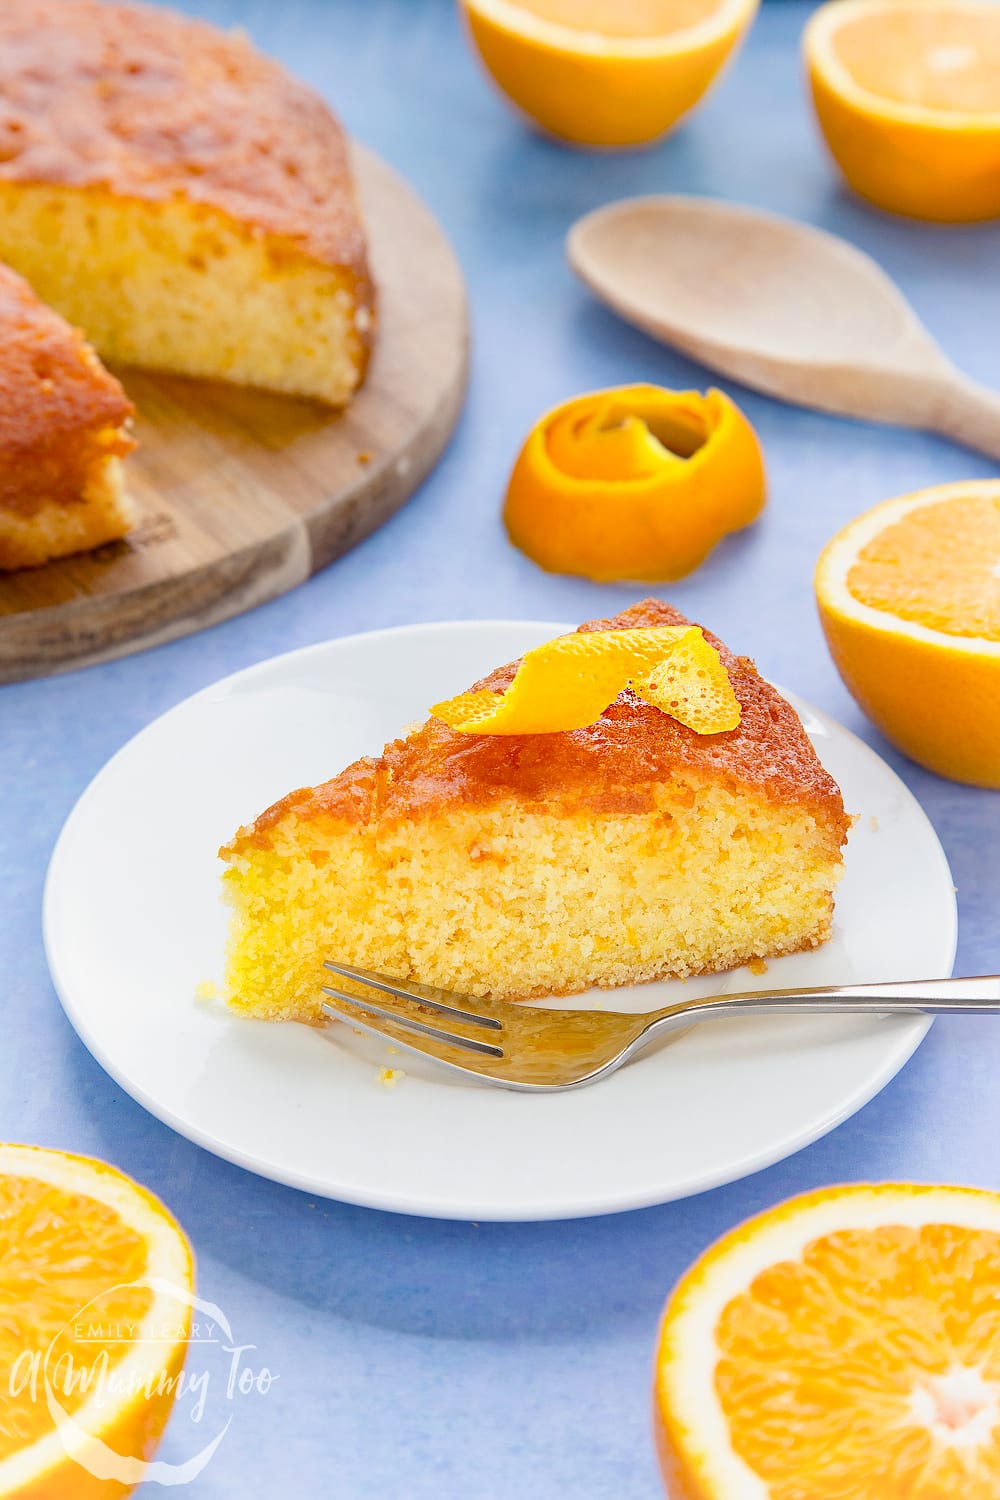 Top more than 140 french orange cake super hot